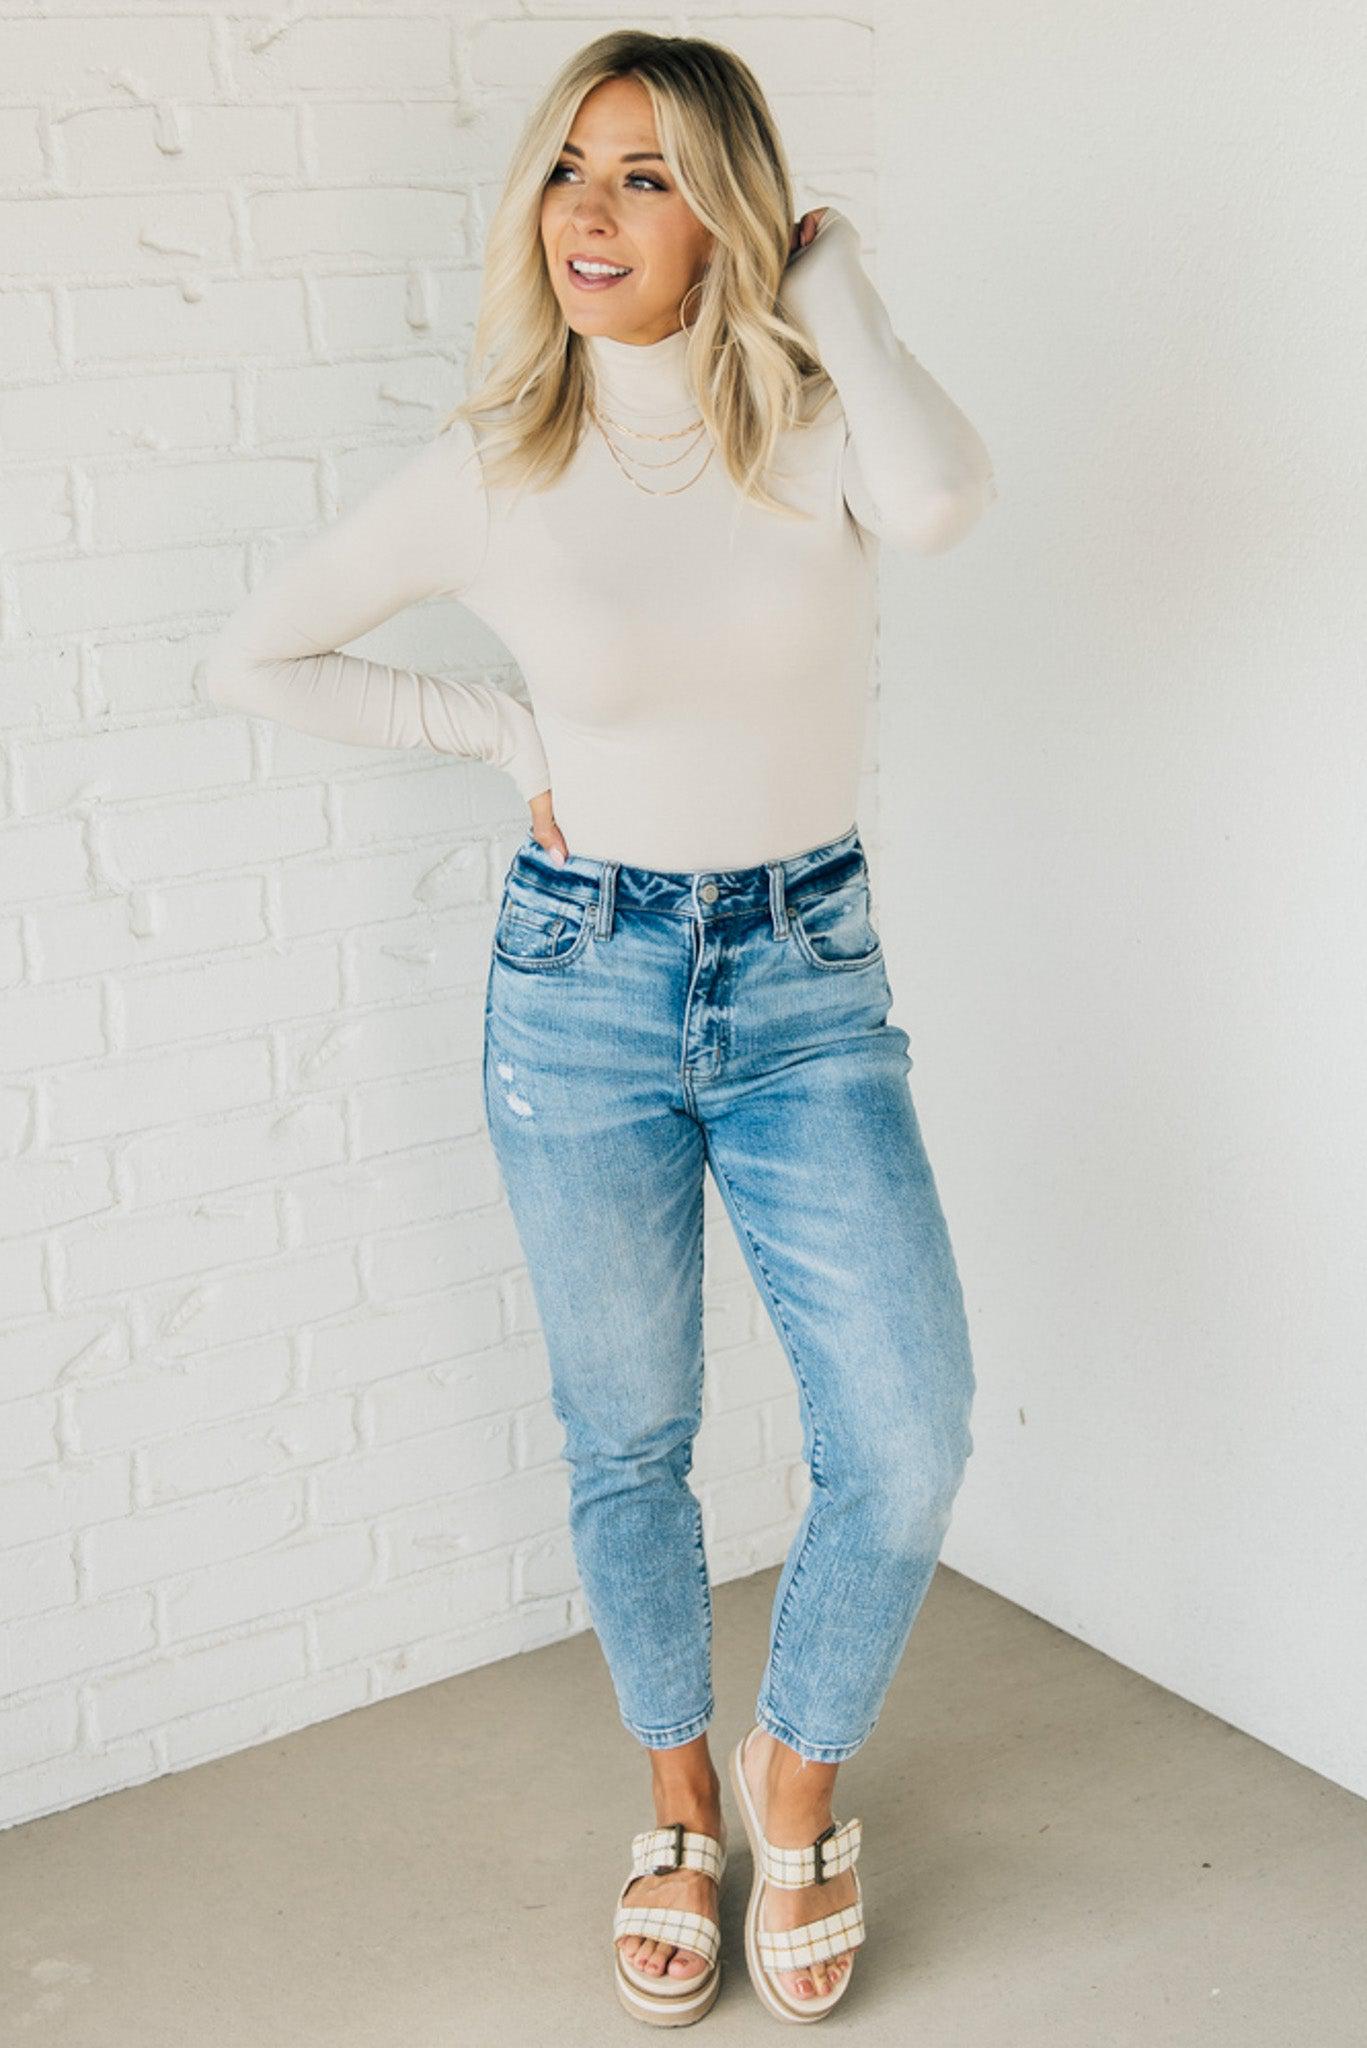 Outfit With Holiday Joy: Ivory Bodysuit + Flare Jeans - The Mom Edit